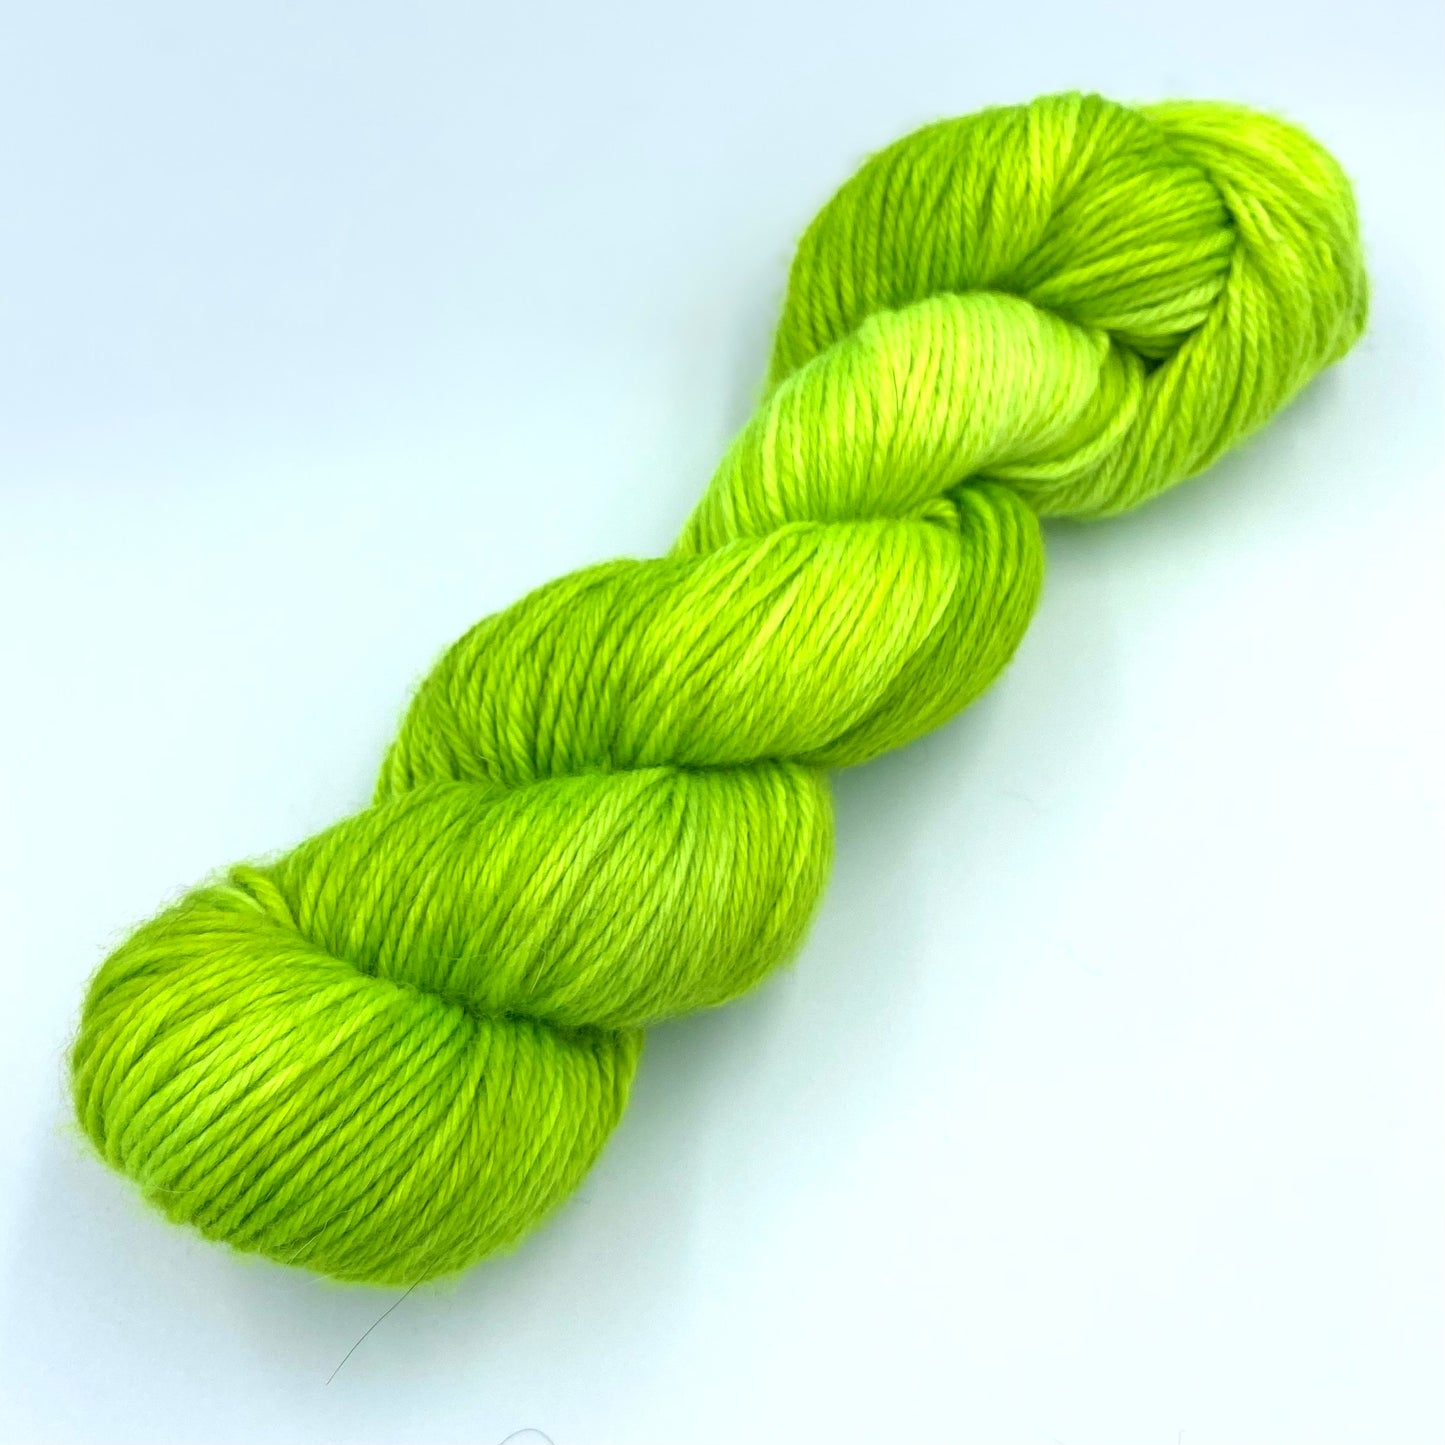 Skein of superwash merino yarn hand dyed in a lime green color